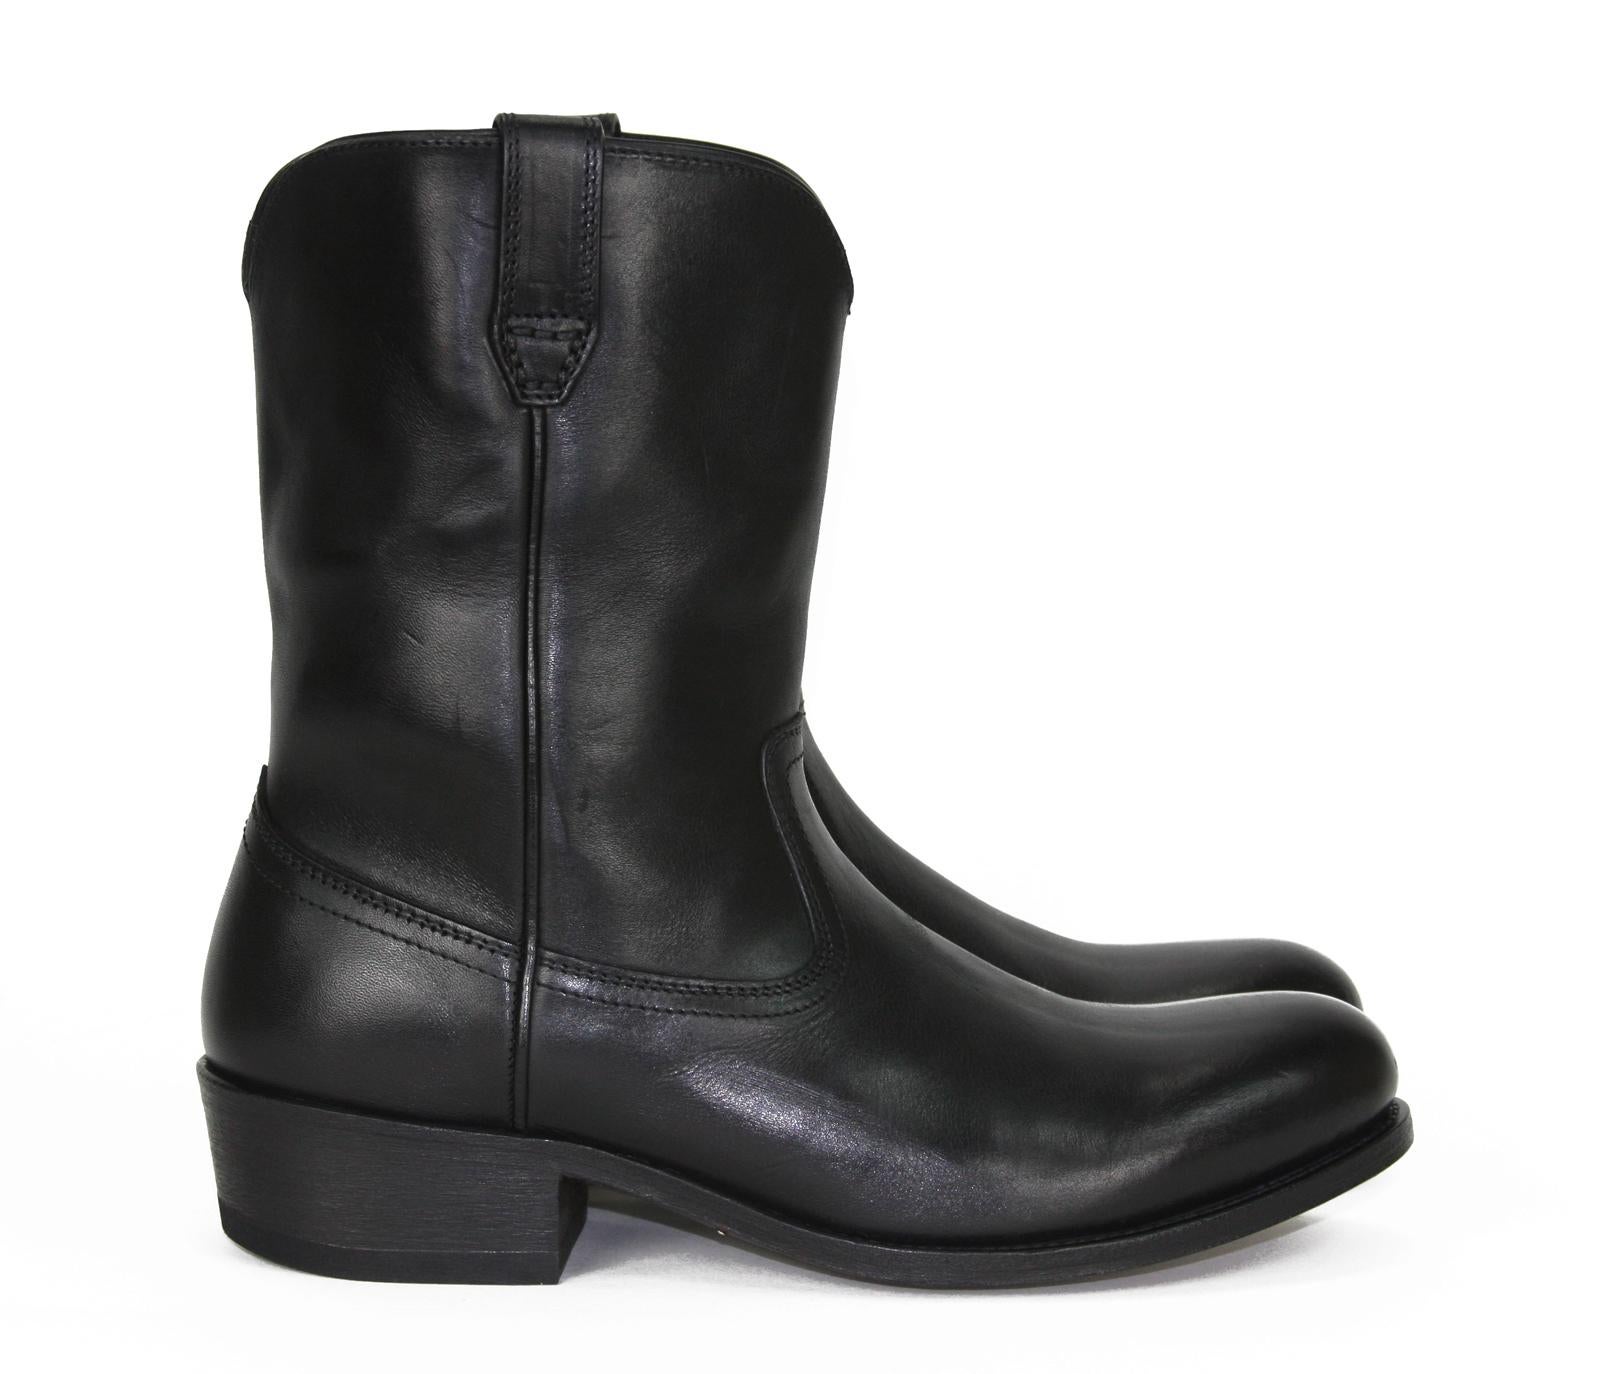 New Tom Ford Men's Western Black Leather Boots
Designer size 8 
Calf leather, Top stitched details, Round Toe, Side Pull-Up Loops, 
Leather lining and insole, Leather Sole.
Flat stacked heel - 1.5 inches, Shaft - 9 inches.
Retail $1990.00
New with